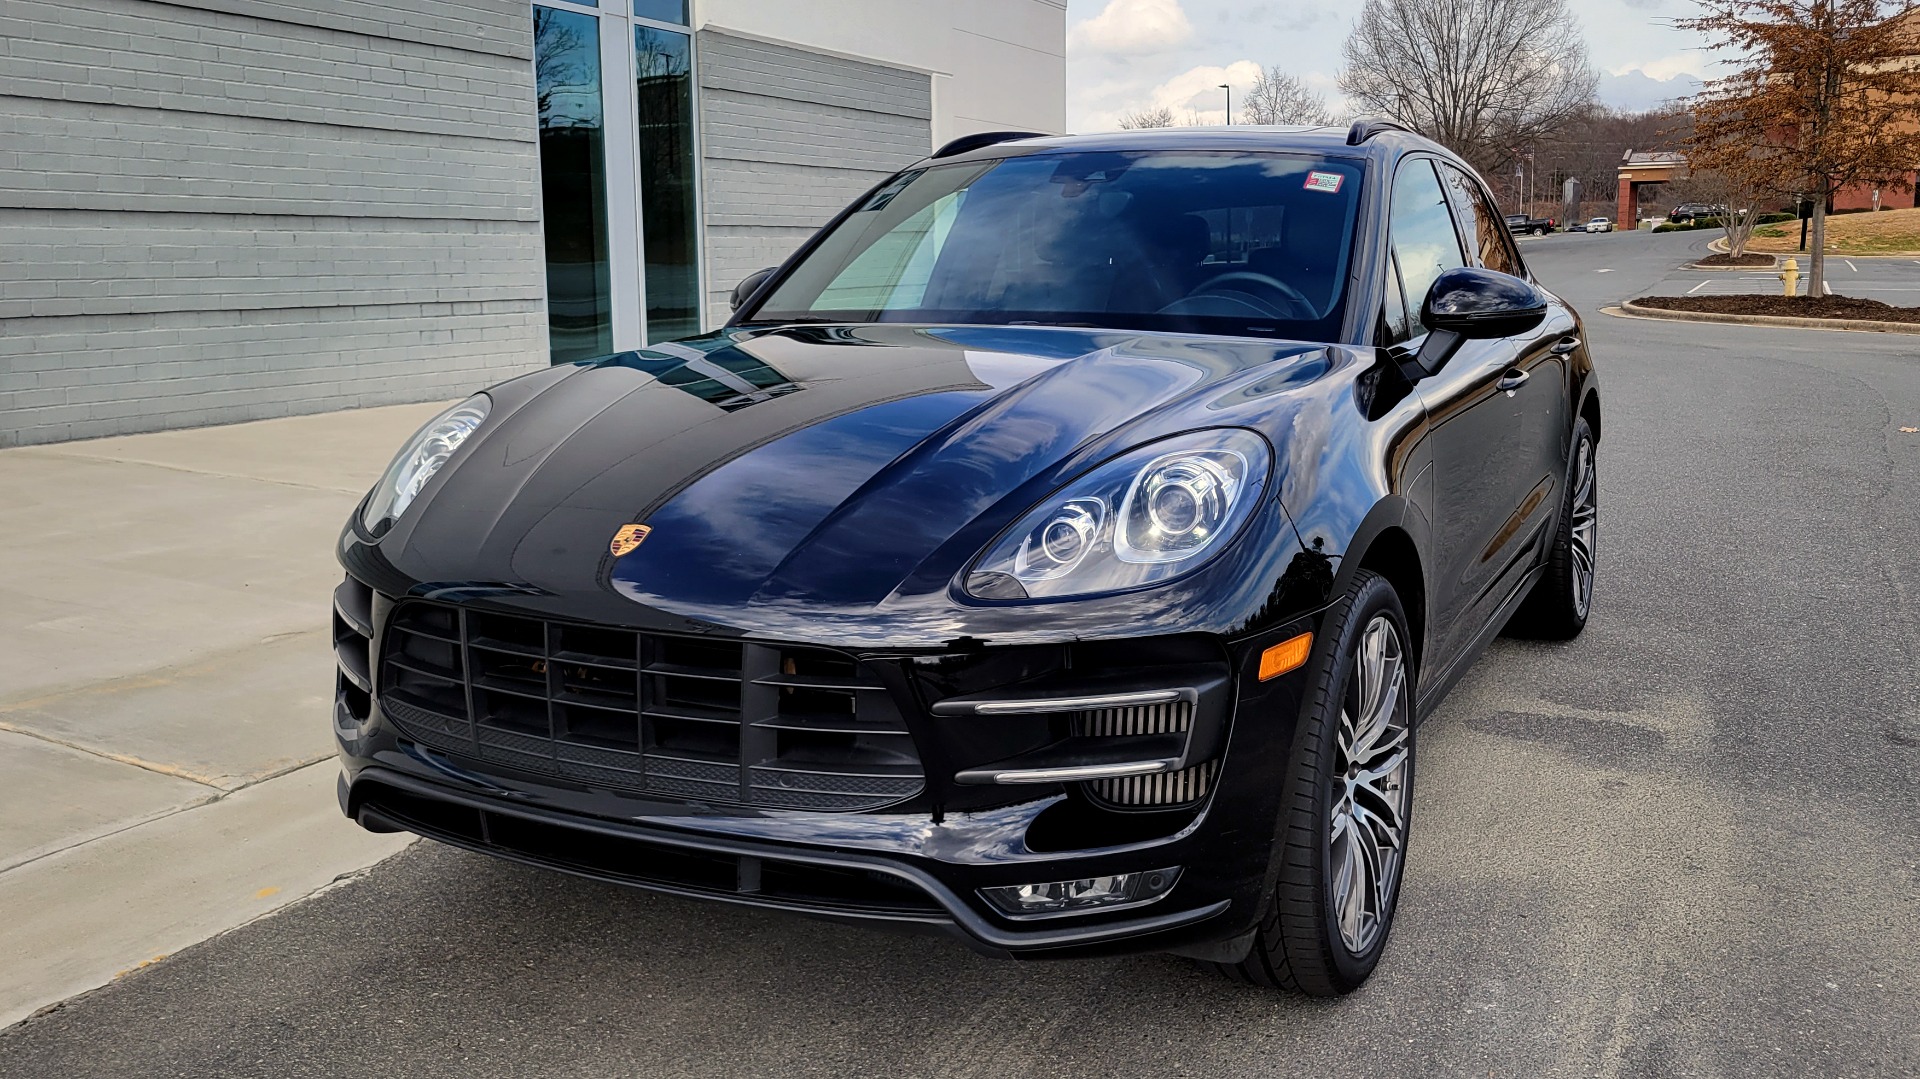 Used 2016 Porsche MACAN TURBO 3.6L PREMIUM / NAV / BOSE / SUNROOF / REARVIEW for sale Sold at Formula Imports in Charlotte NC 28227 2